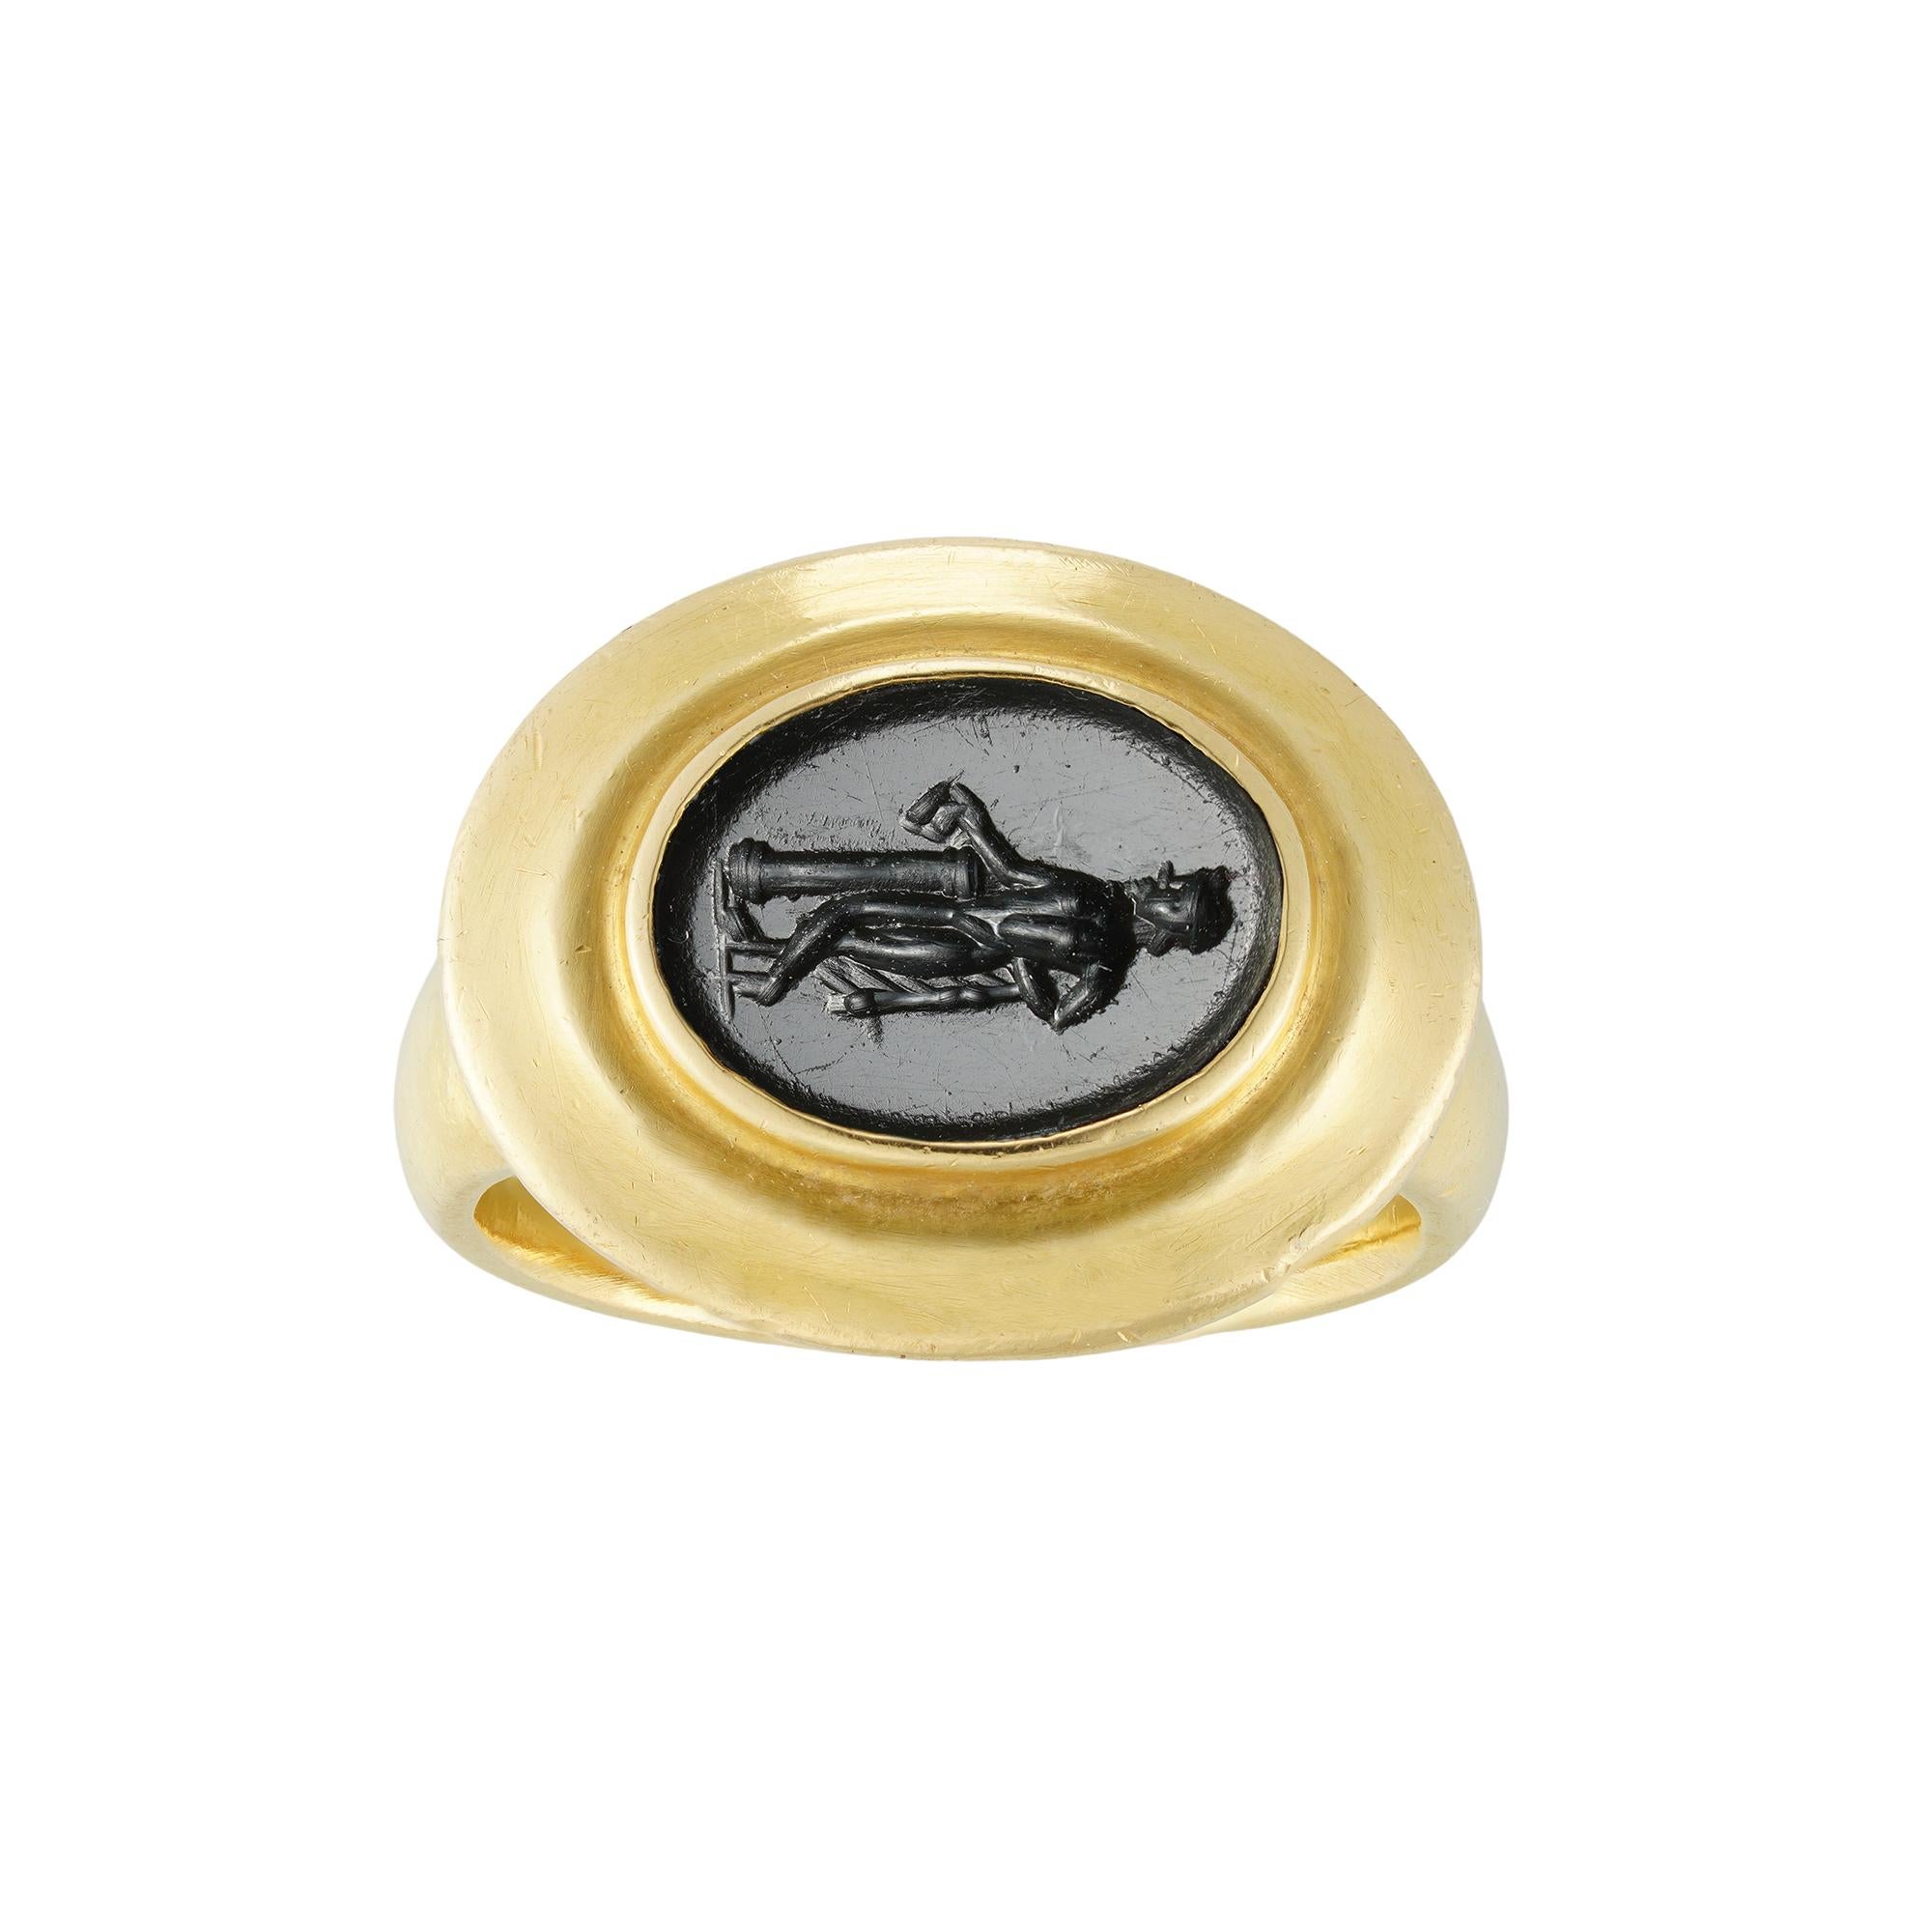 A Roman onyx intaglio and yellow gold ring, the oval- shaped onyx measuring approximately 11 x 8.5 mm, depicting Dionysus leaning on a column and holding a kantharos, carved in 1st-2nd century AD, rub-over set in later yellow gold mount, testing as